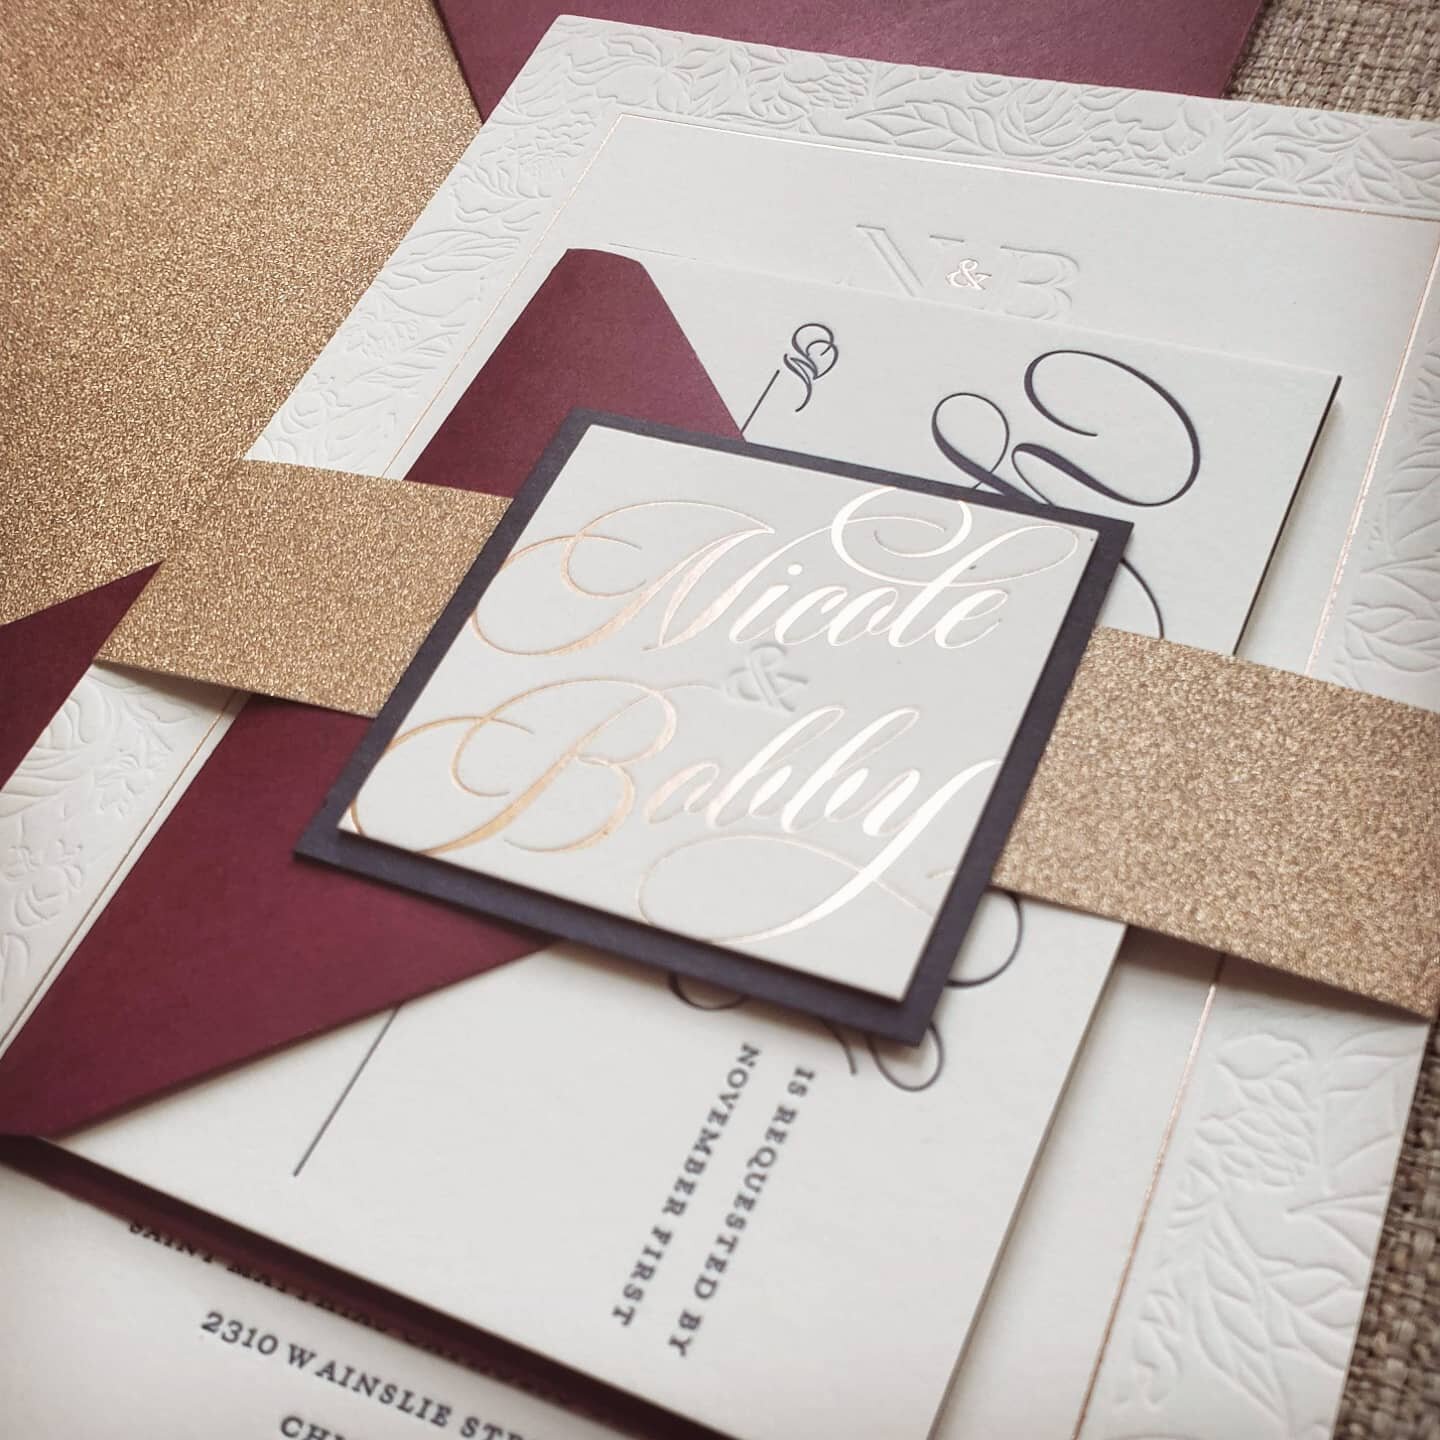 Happy one year anniversary to Nicole &amp; Bobby!  We are still so in love with their stunning invitation suite. It's a triple (printing) threat: Navy Letterpress, Rose Gold Foil Press, &amp; Blind Emboss Press!  So many beautiful textures and colors